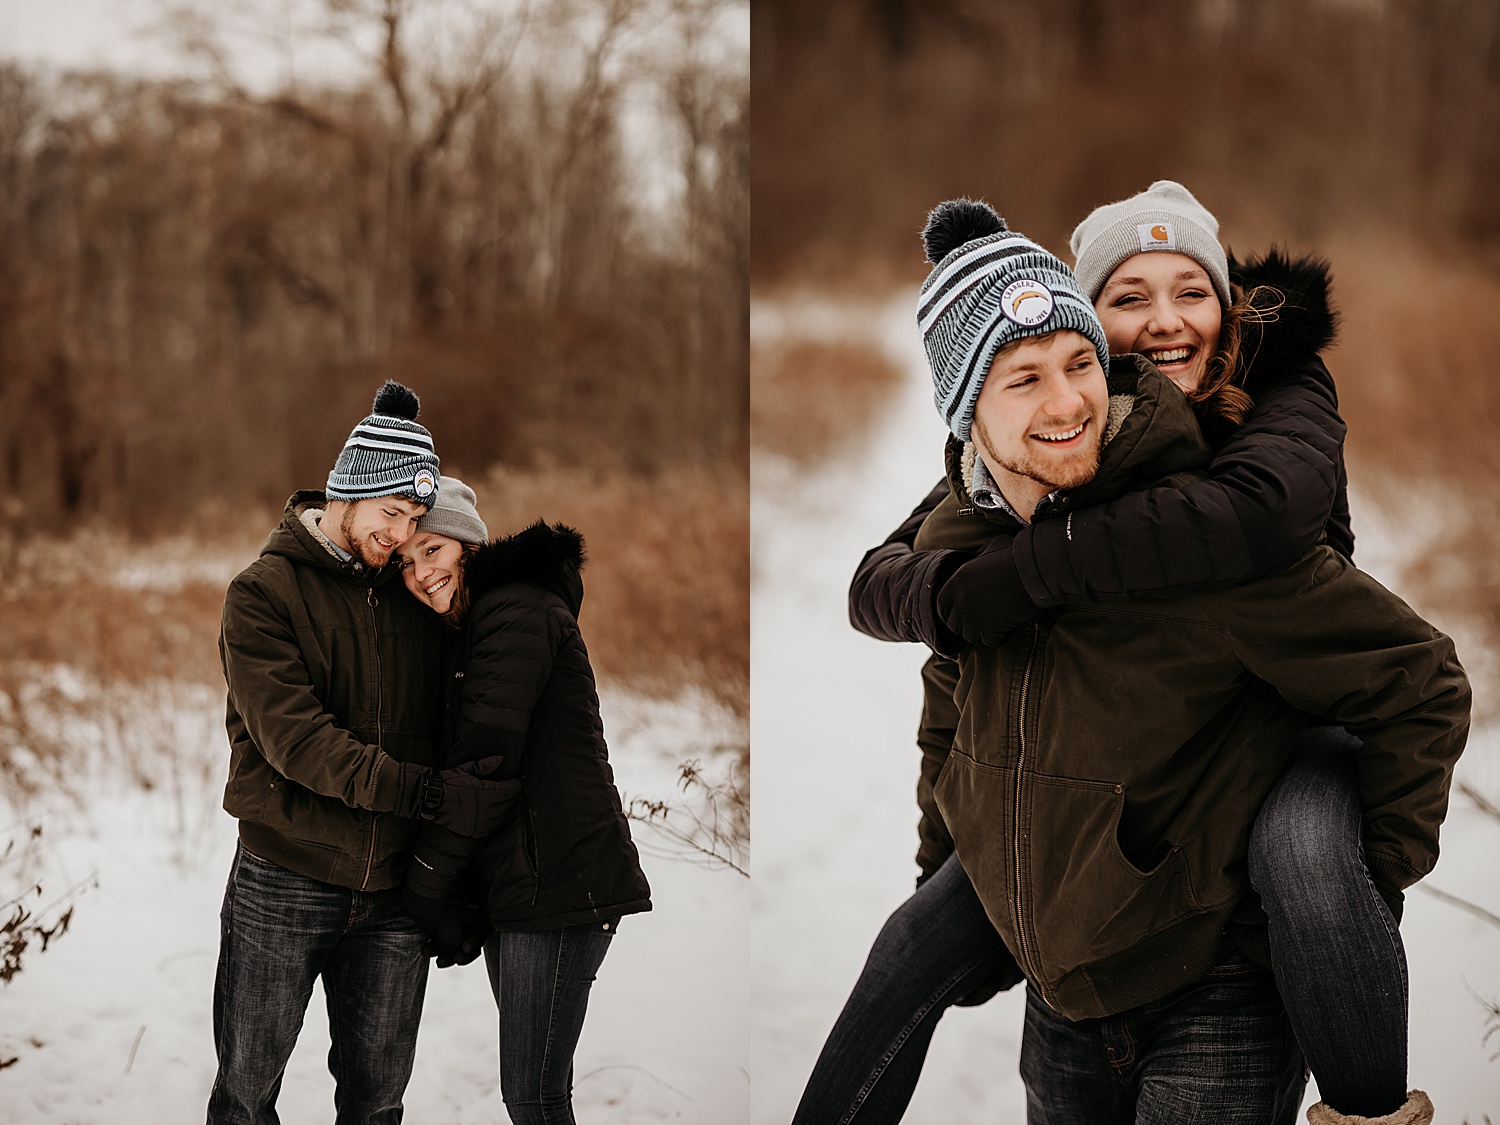 Piggy back ride during snow we engagement session while couple wears beanies and winter coats